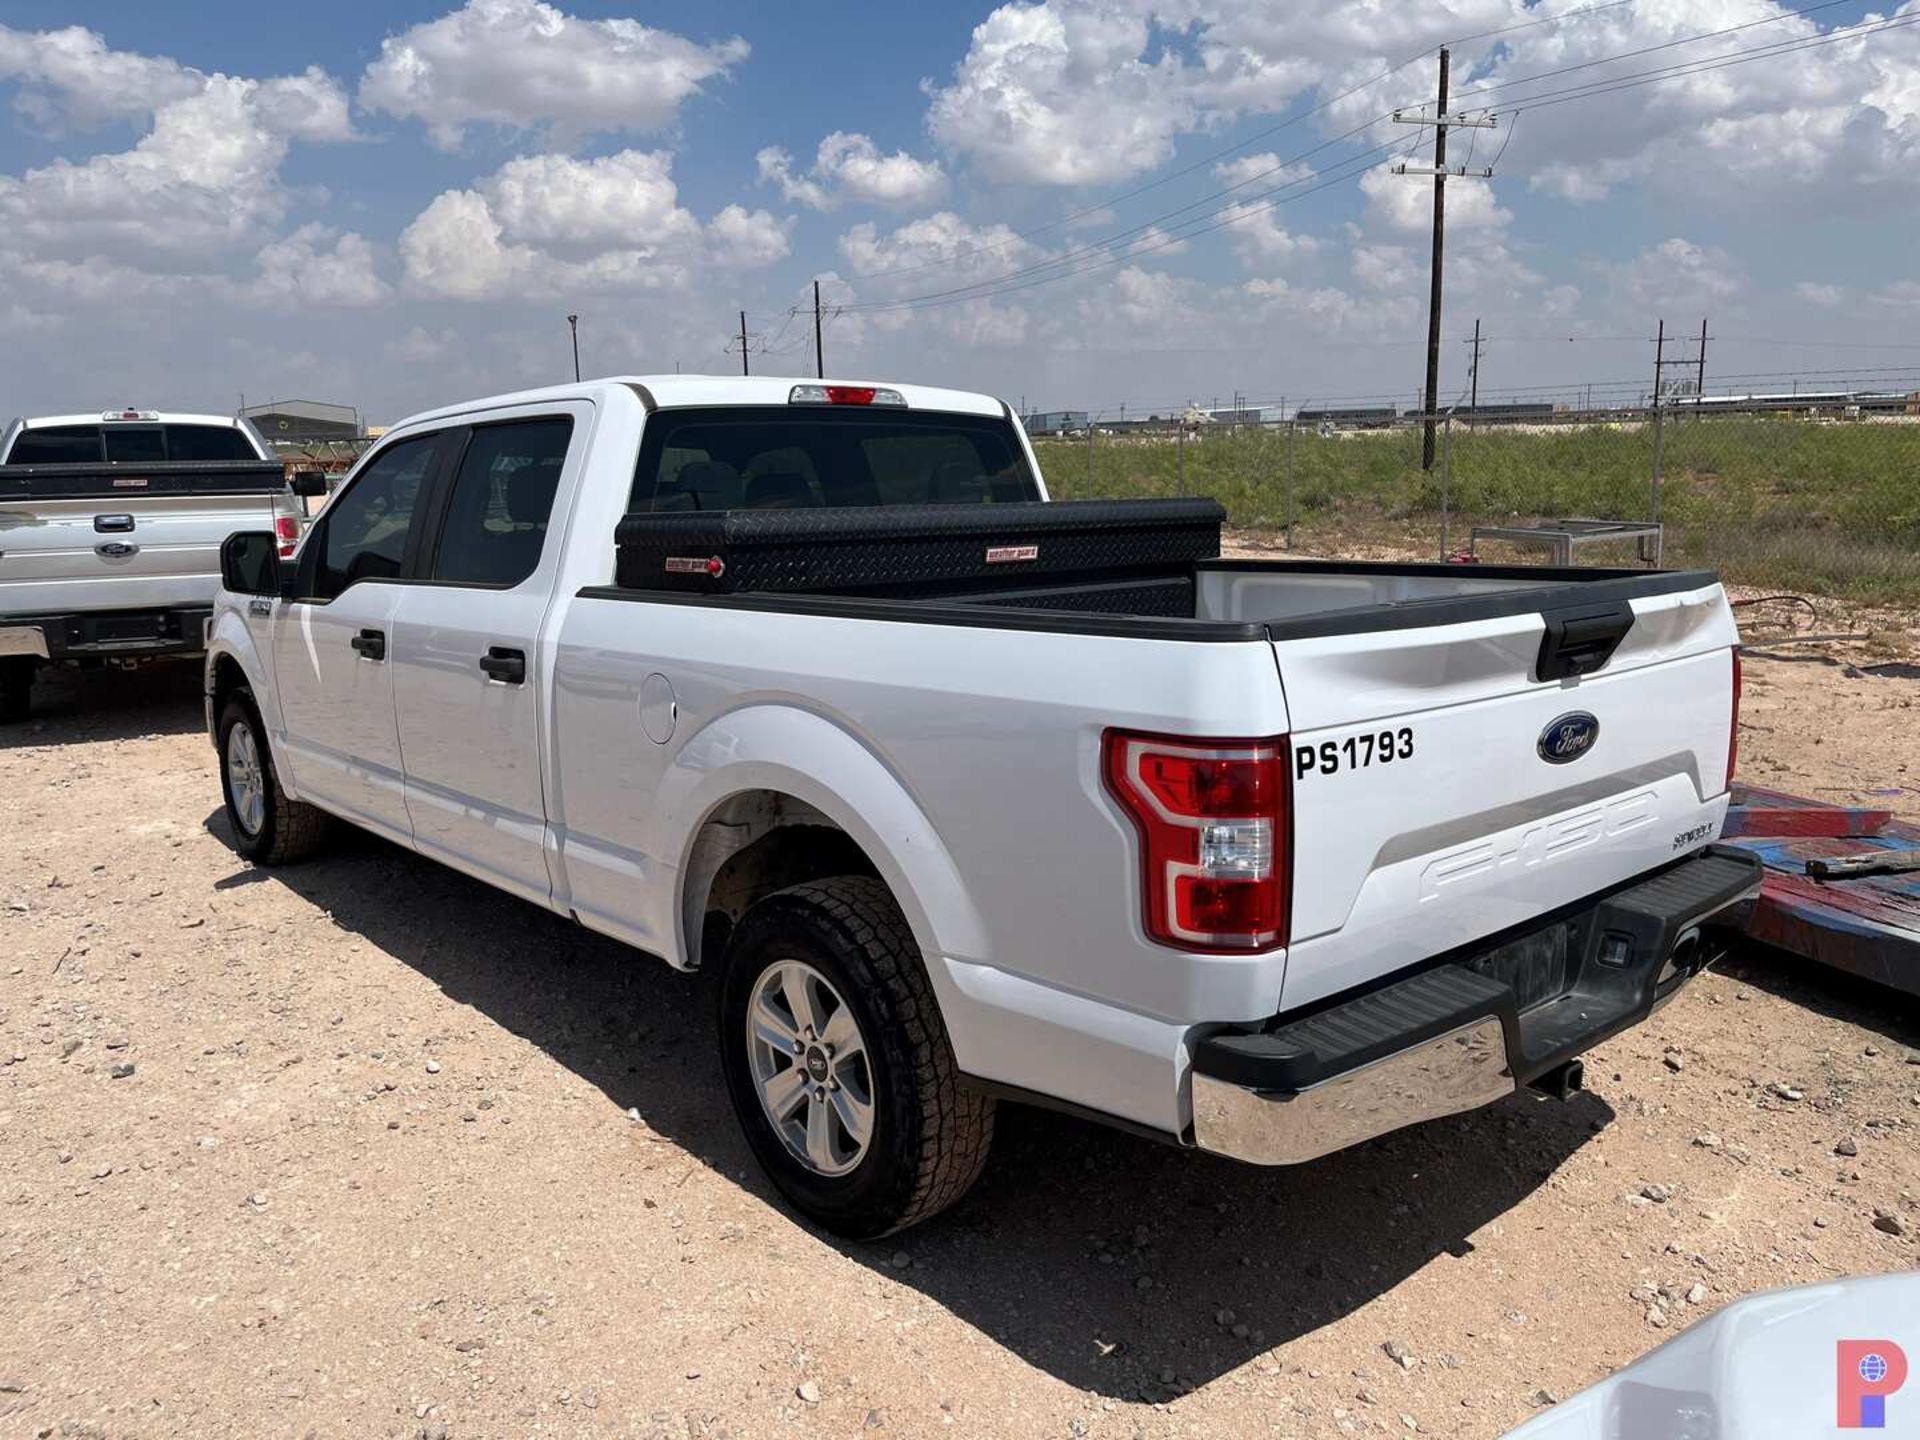 2019 FORD F-150 CREW CAB PICKUP TRUCK - Image 4 of 7